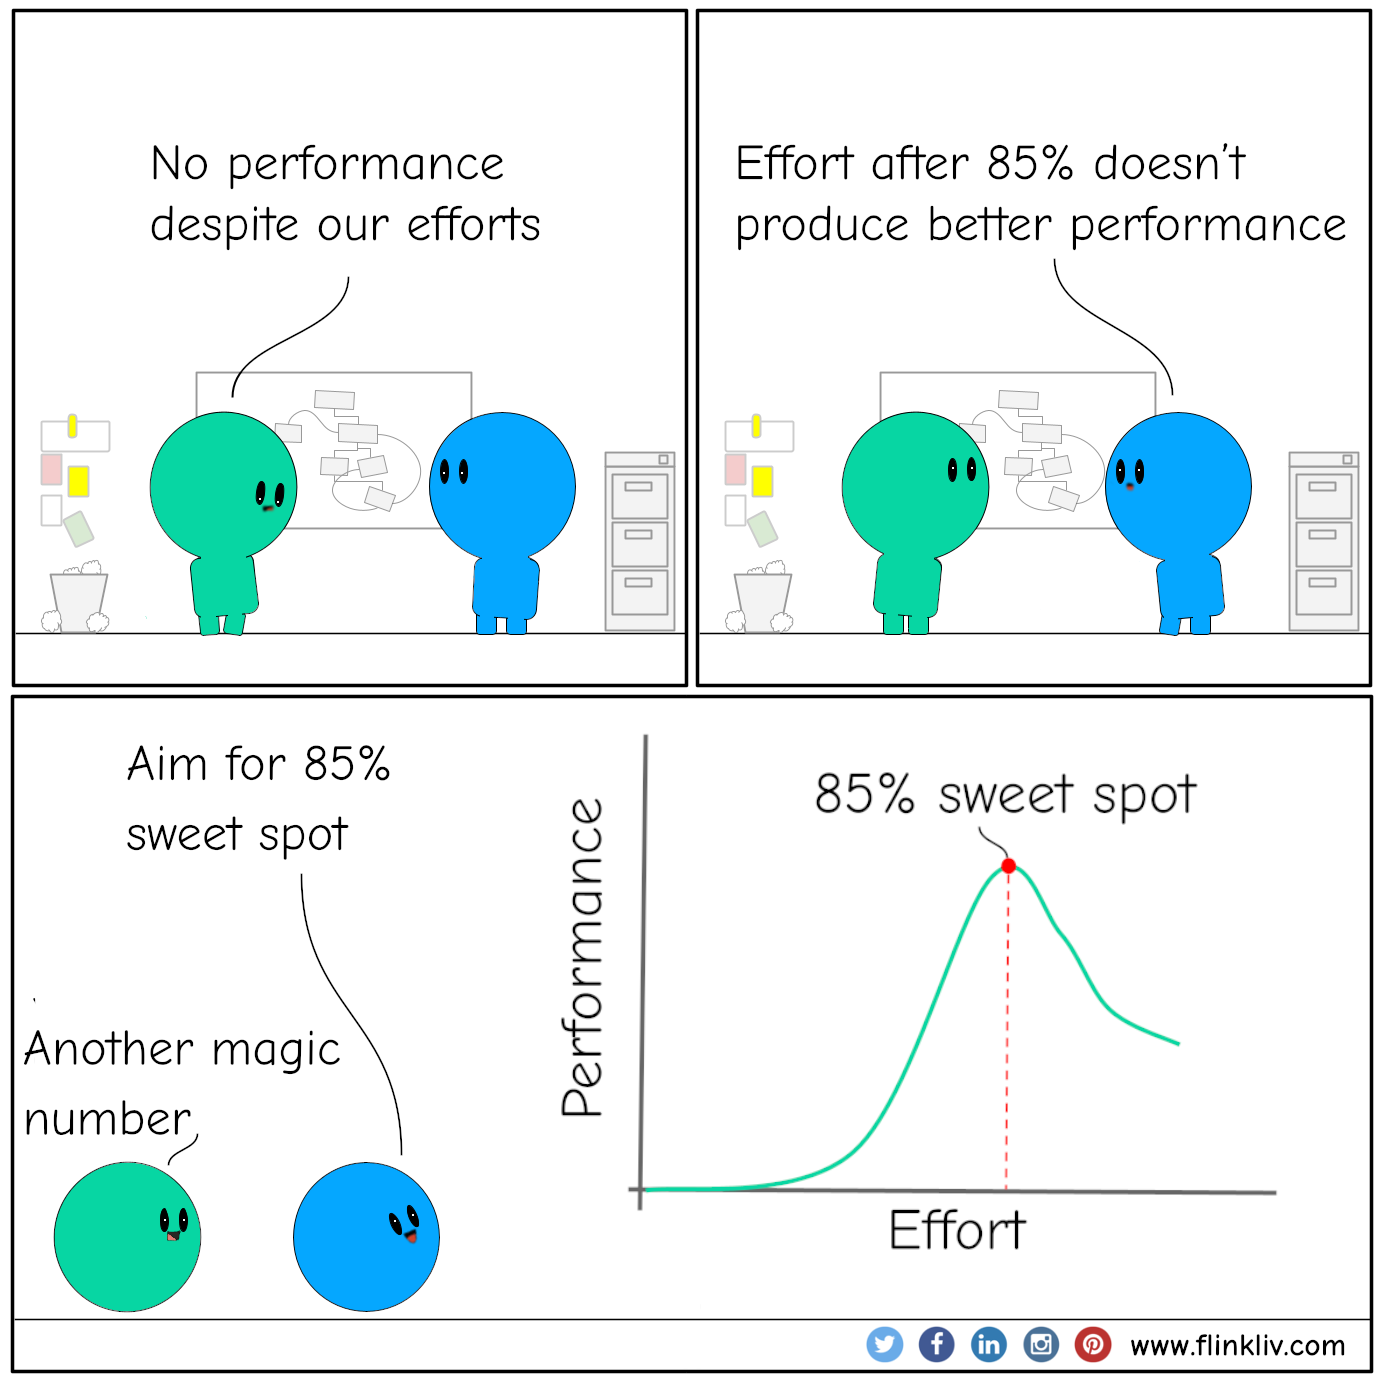 Conversation between A and B about the 85% rule
				A: No performance despite our efforts
				B: Effort after 85% doesn’t produce better performance
				B: Aim for 85% sweet spot
				A: Another magic number
				